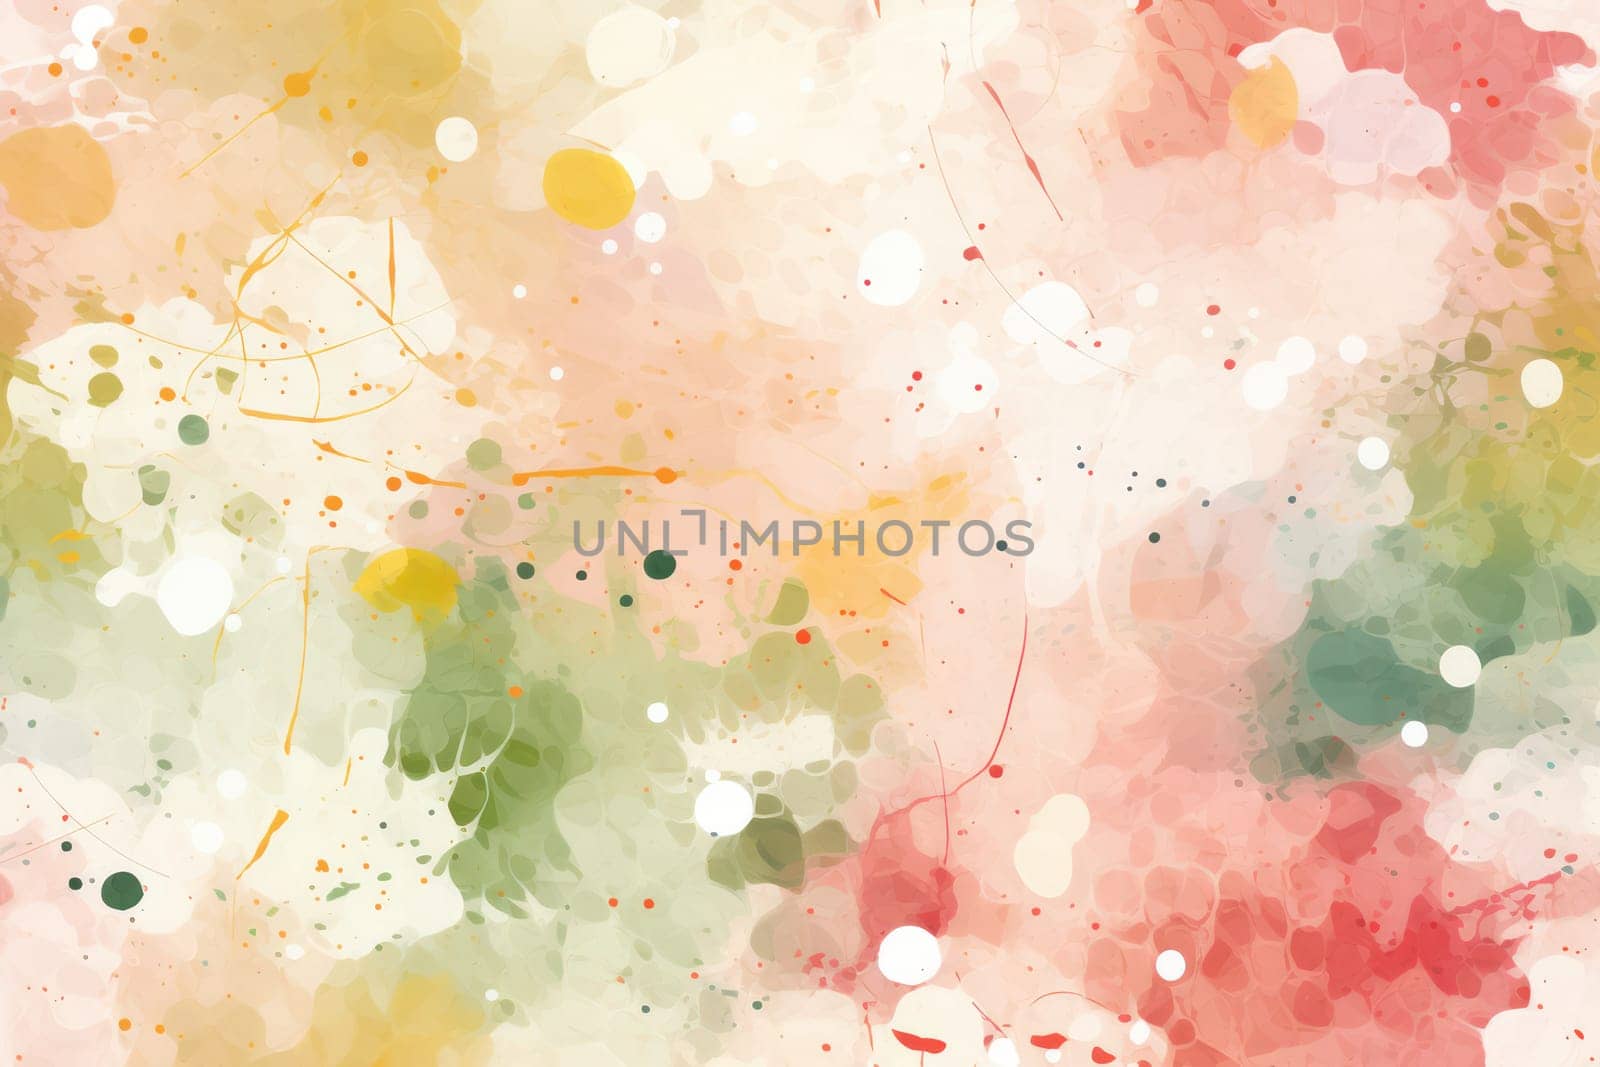 Colorful Abstract Watercolor Paint Splash on Textured Grunge Background: Artistic Brush Stroke Pattern